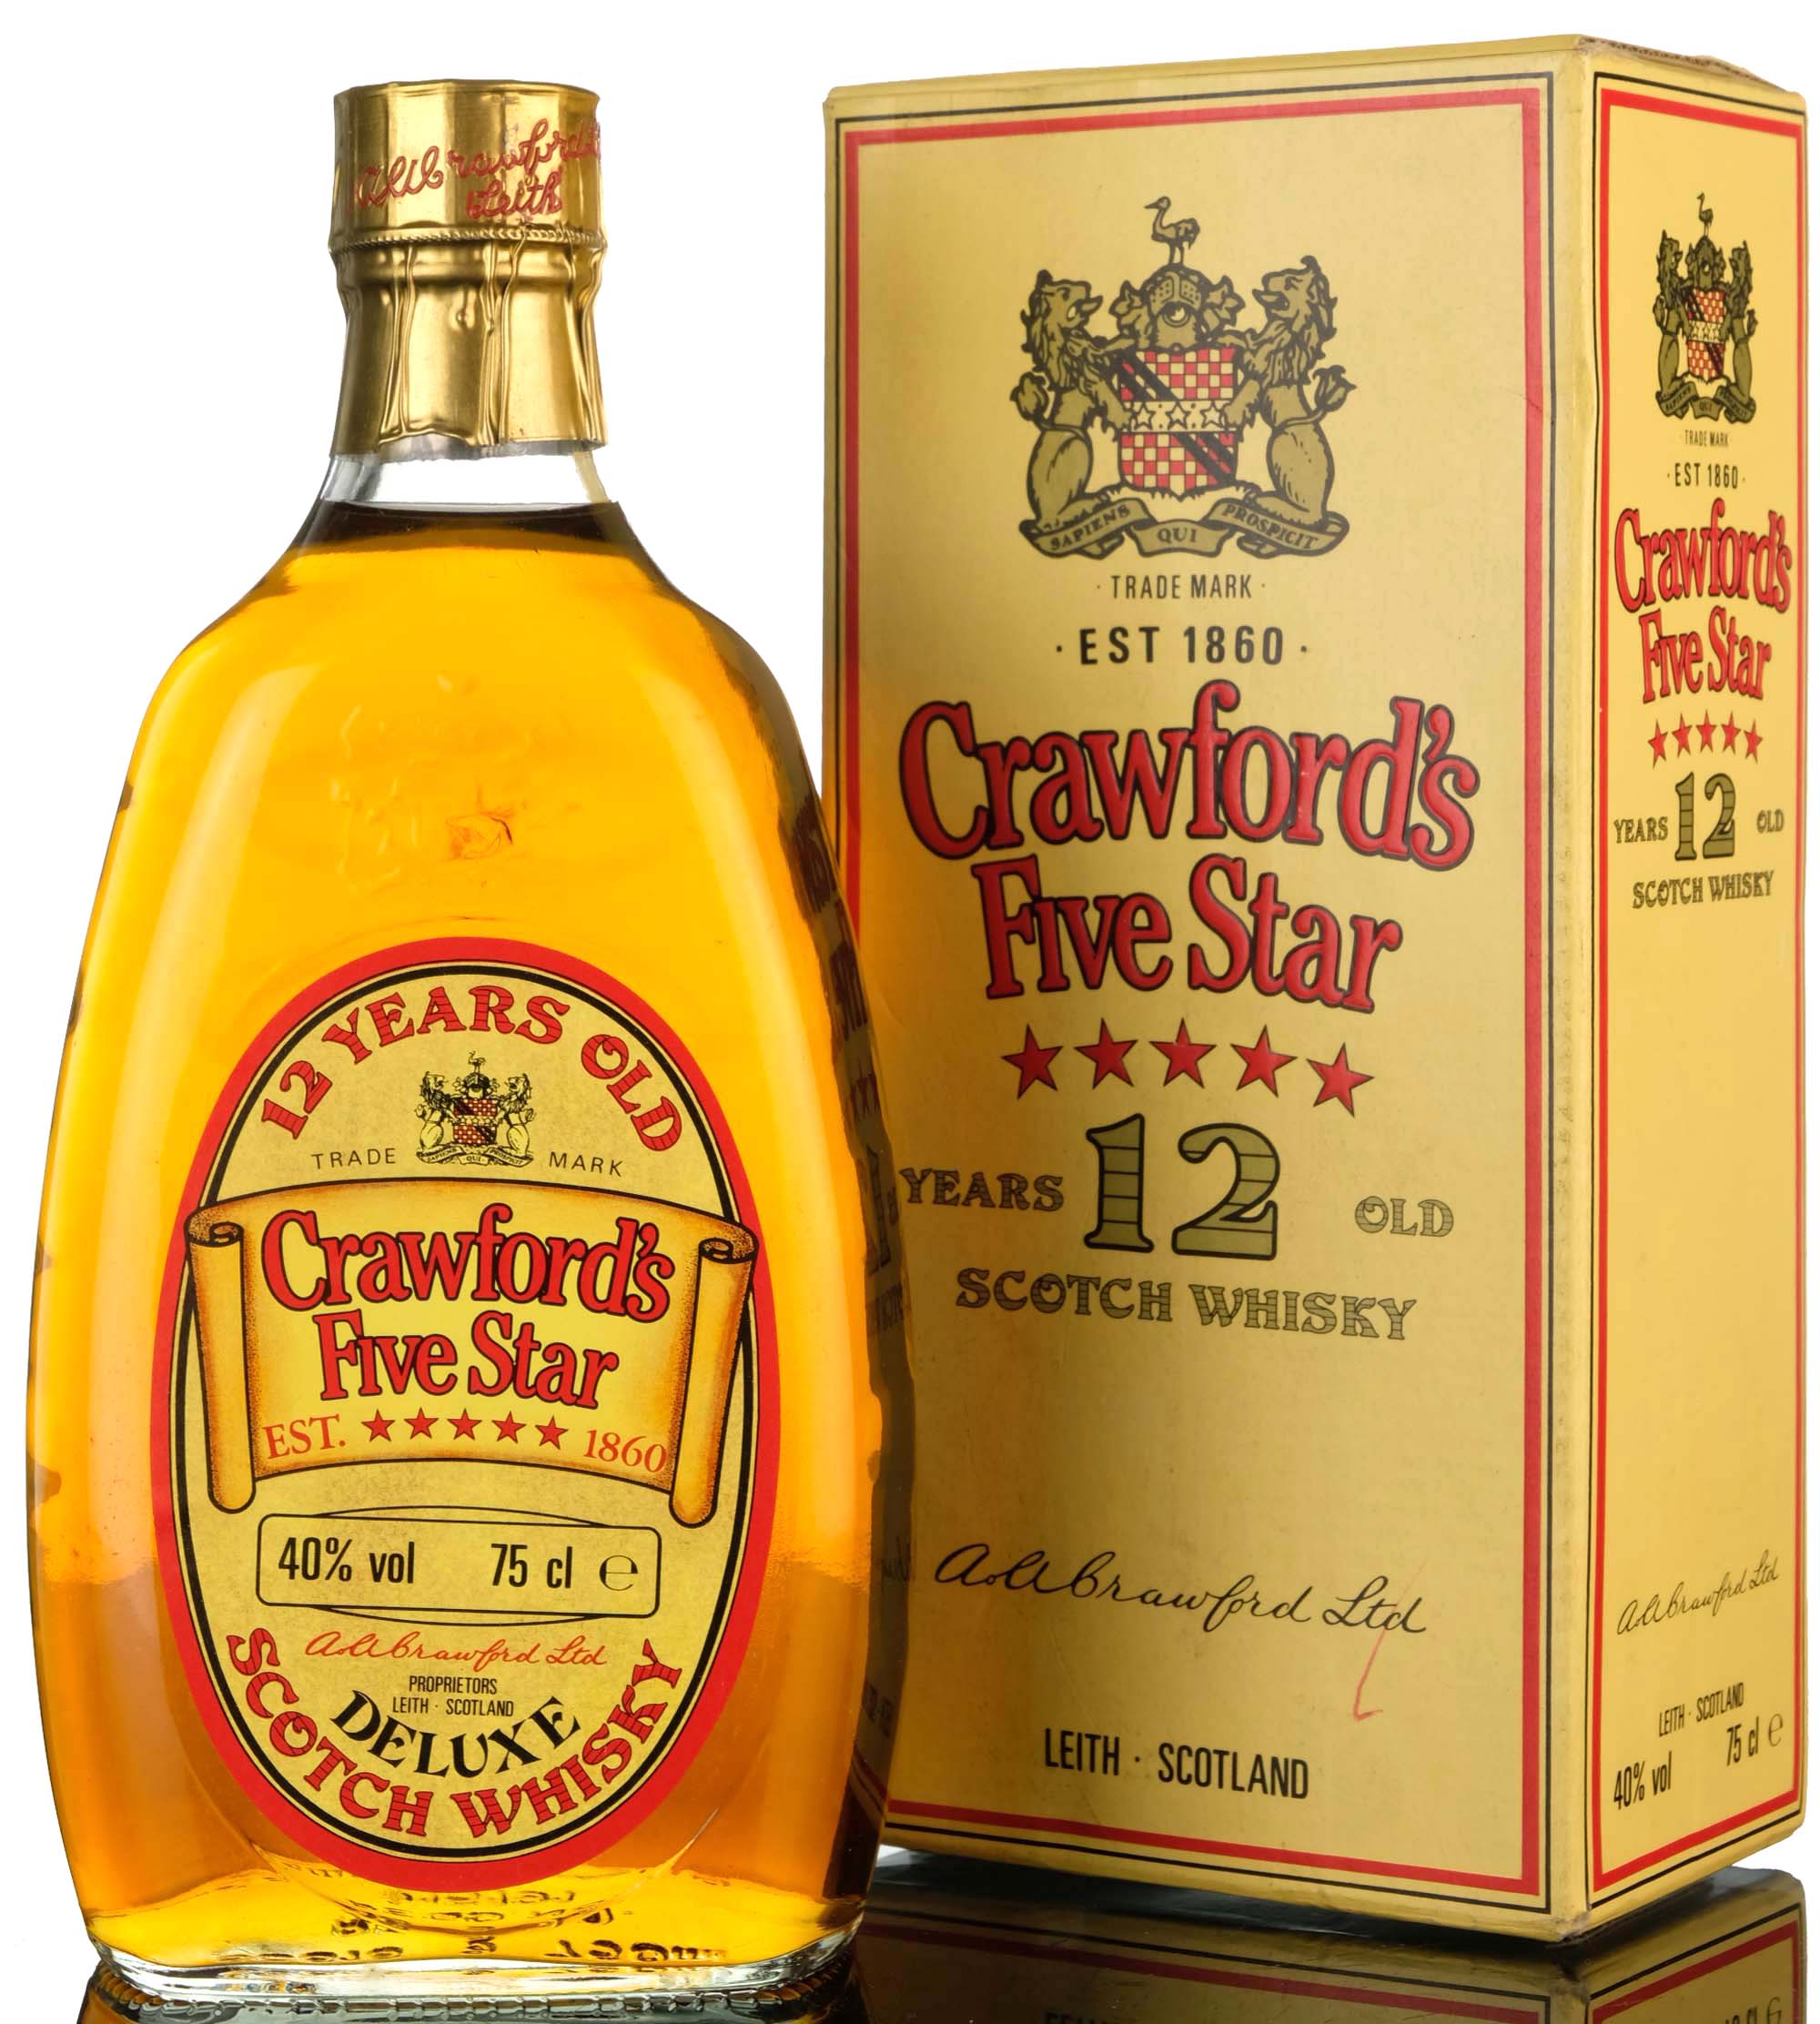 Crawfords 12 Year Old - 5 Star - 1980s